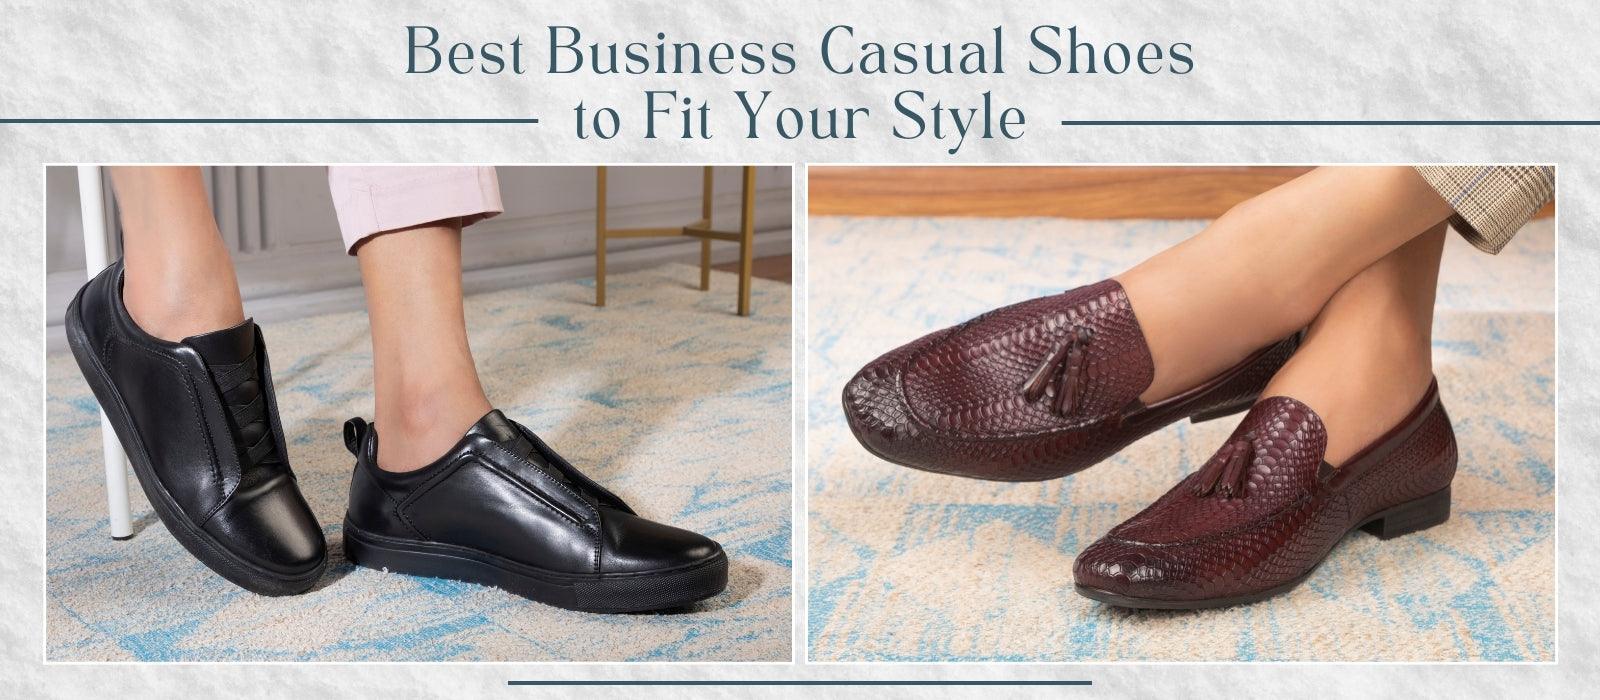 7 Best Business Casual Shoes to Fit Your Style - Tresmode